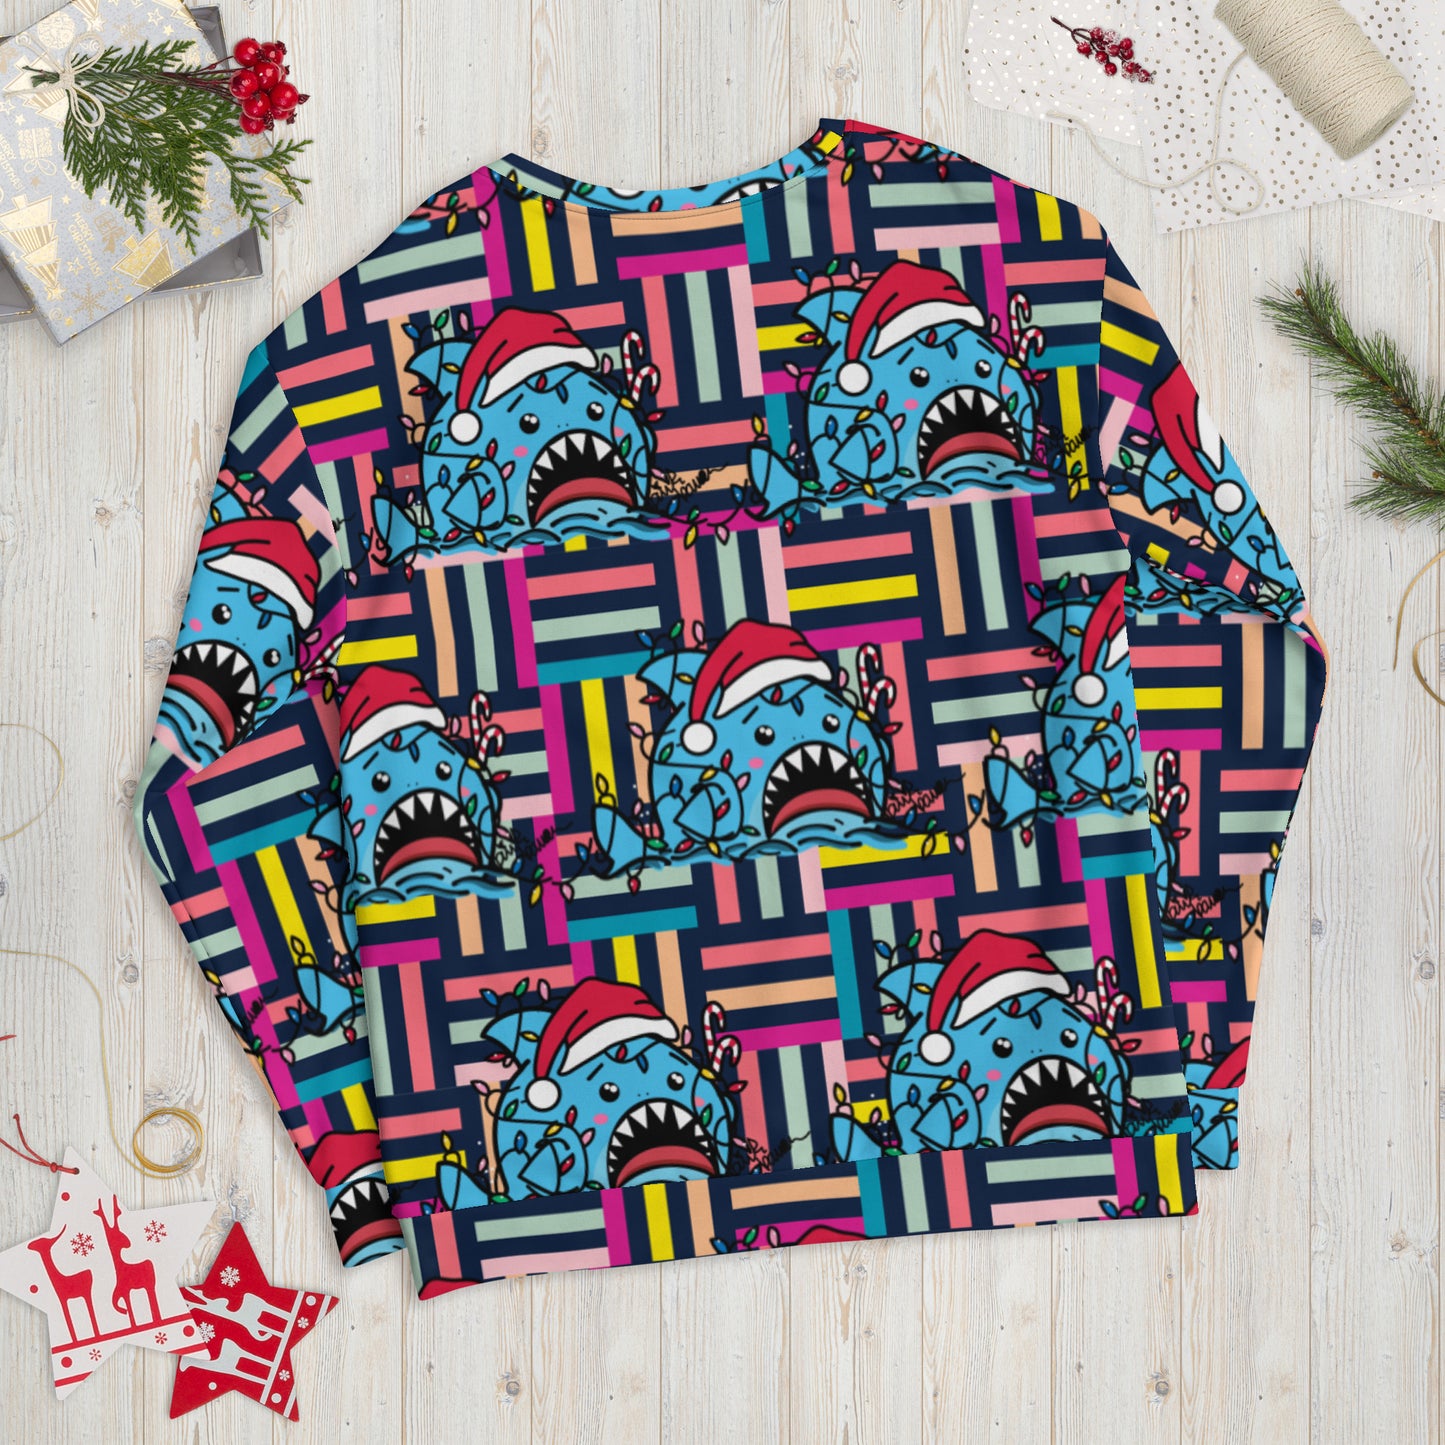 Holiday Sharks Ugly Christmas Sweater- Let There Be Lights (Genderless Sweatshirt)